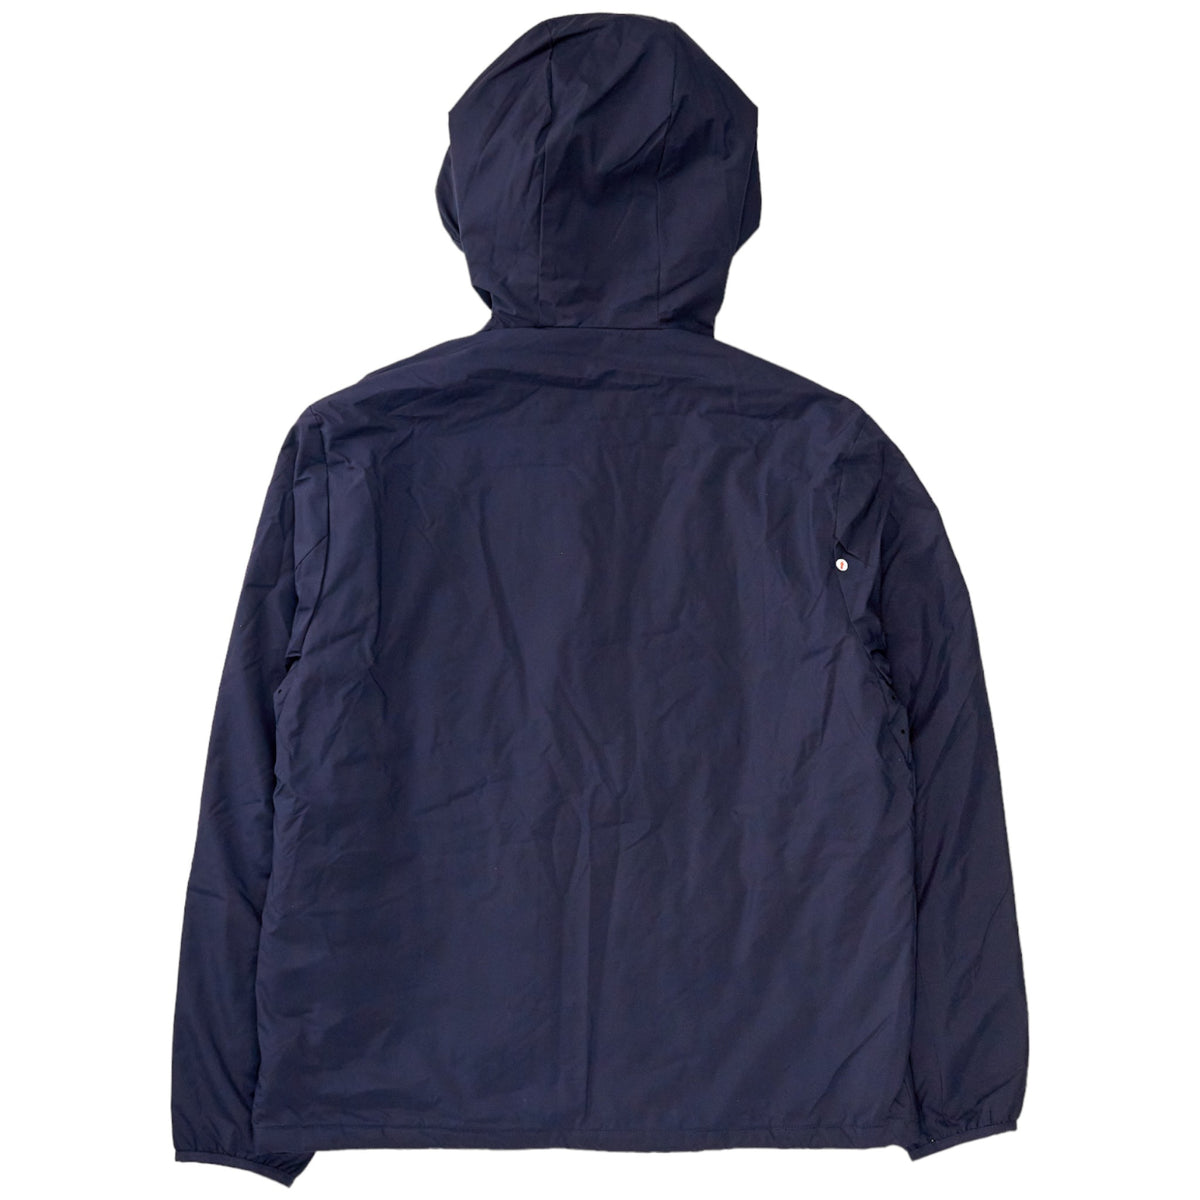 Norse Projects Navy Padded Jacket